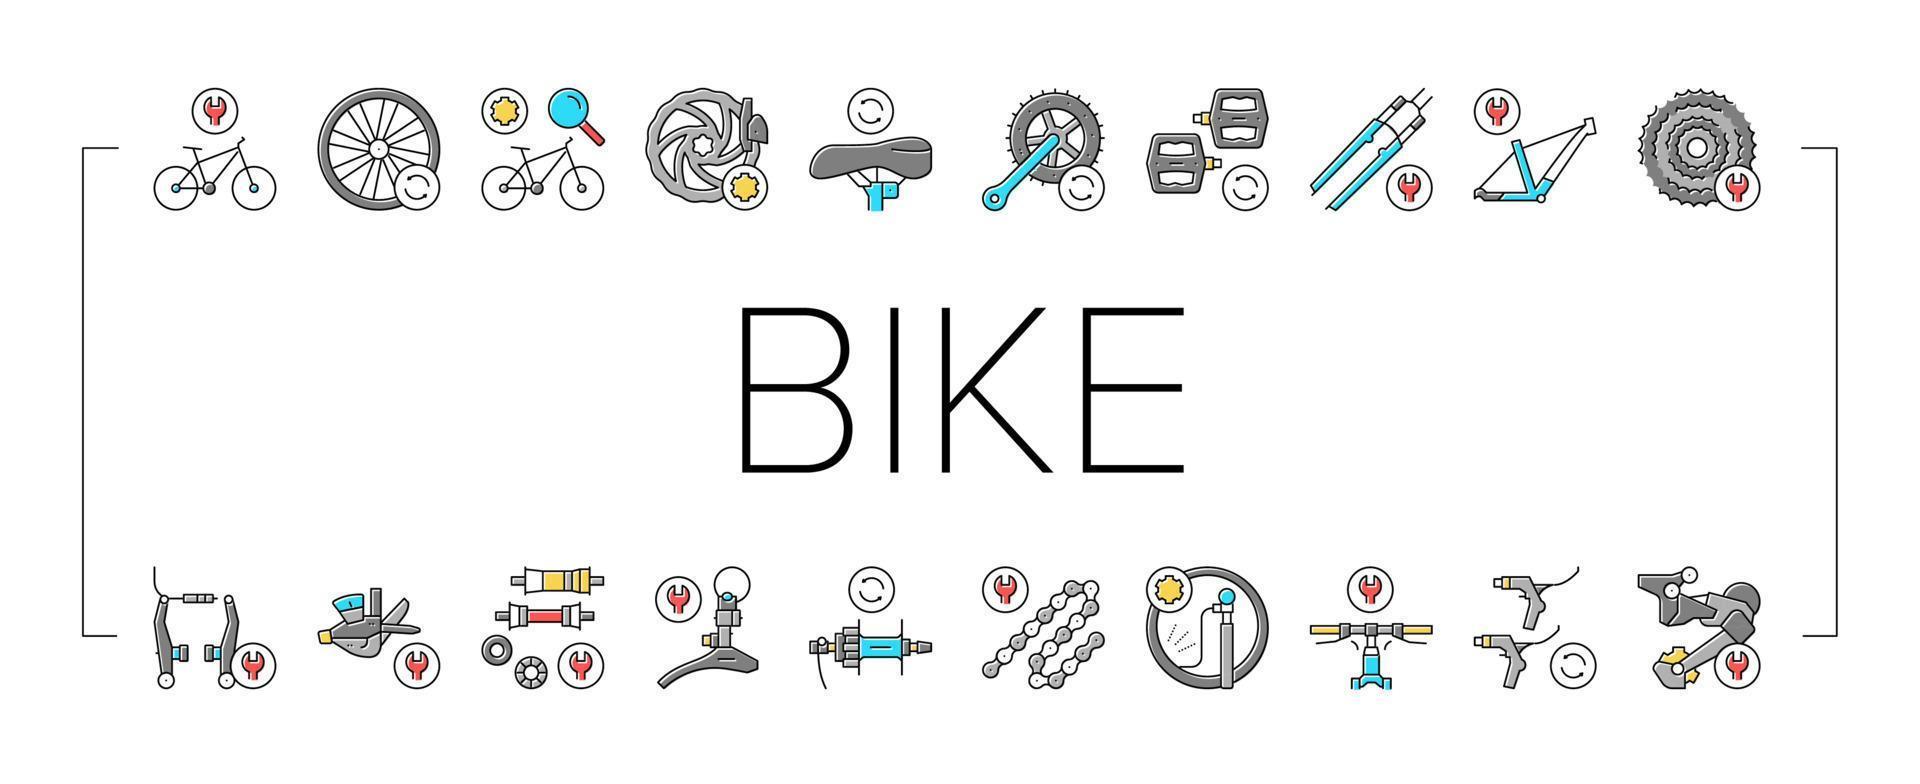 Bike Repair Service Collection Icons Set Vector